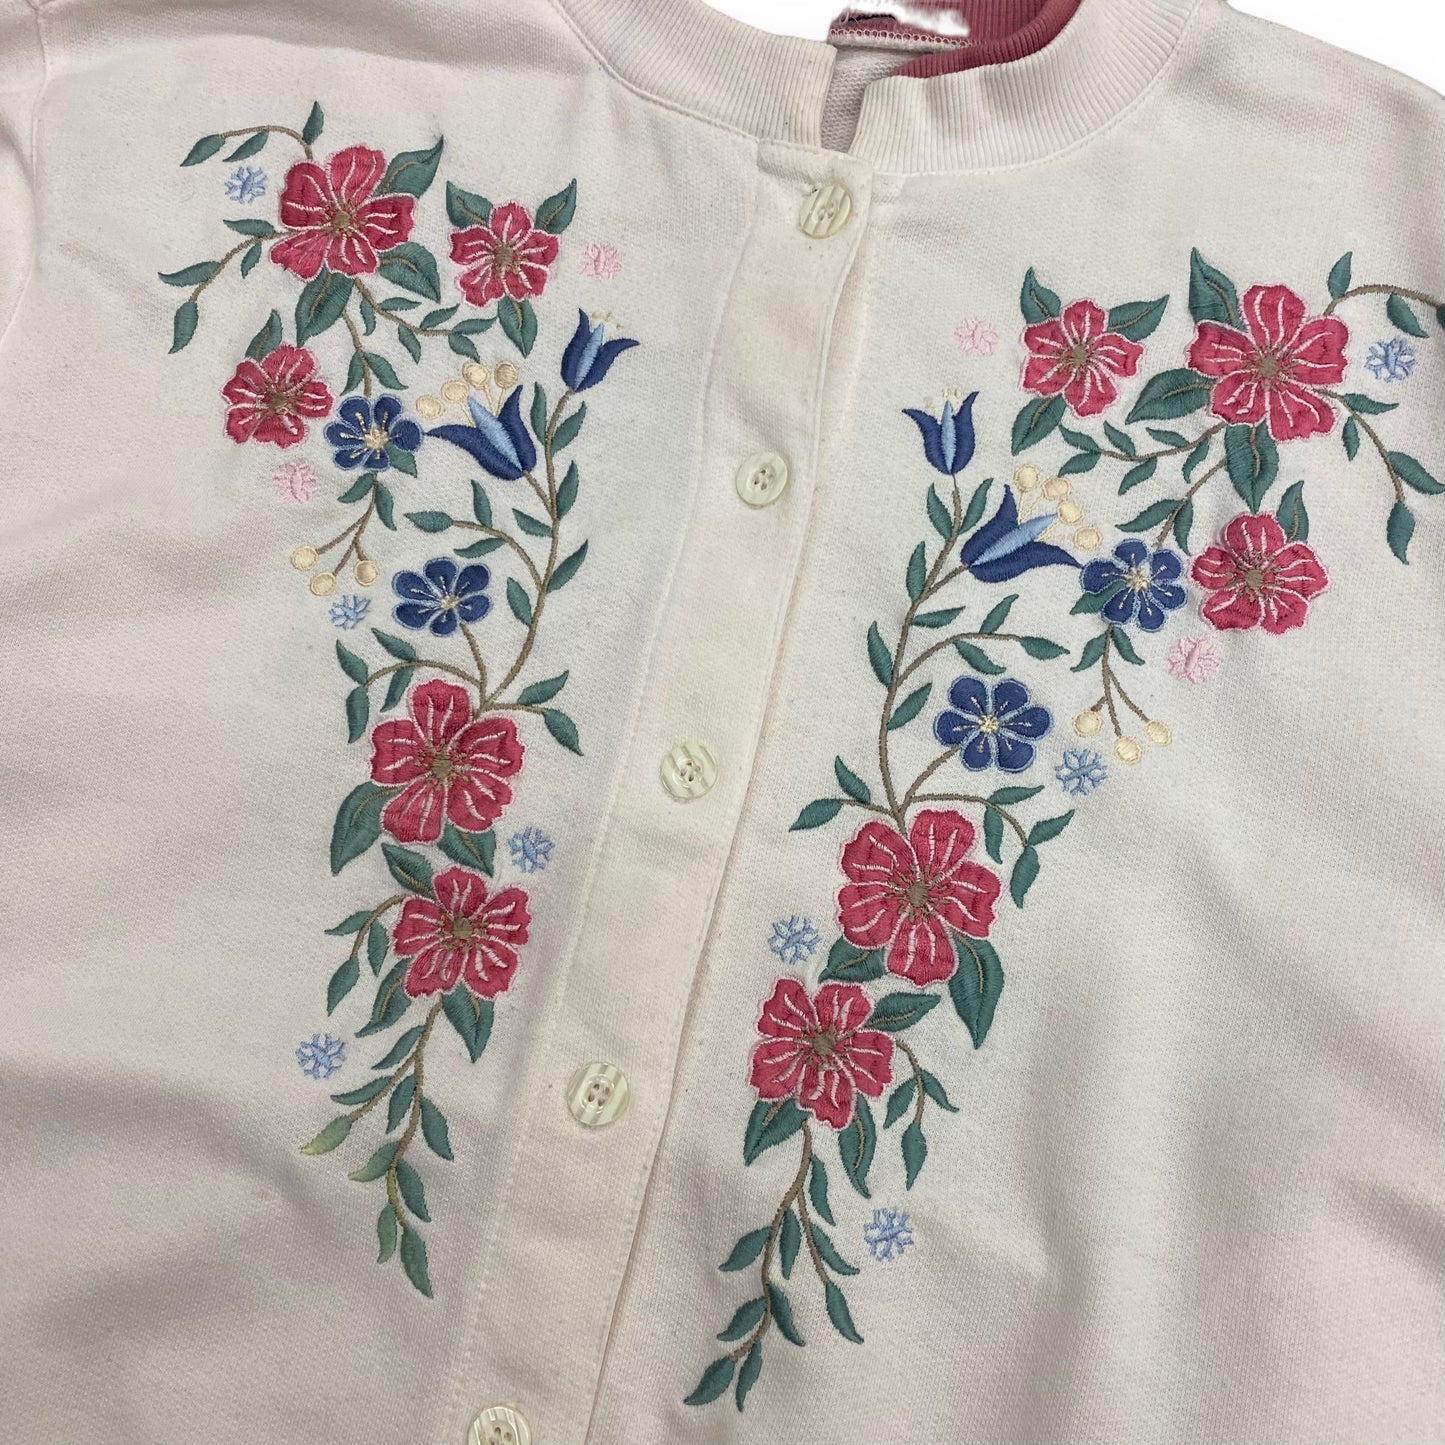 Vintage 1990s Embroidered Floral Double Collar Cardigan - Size XL